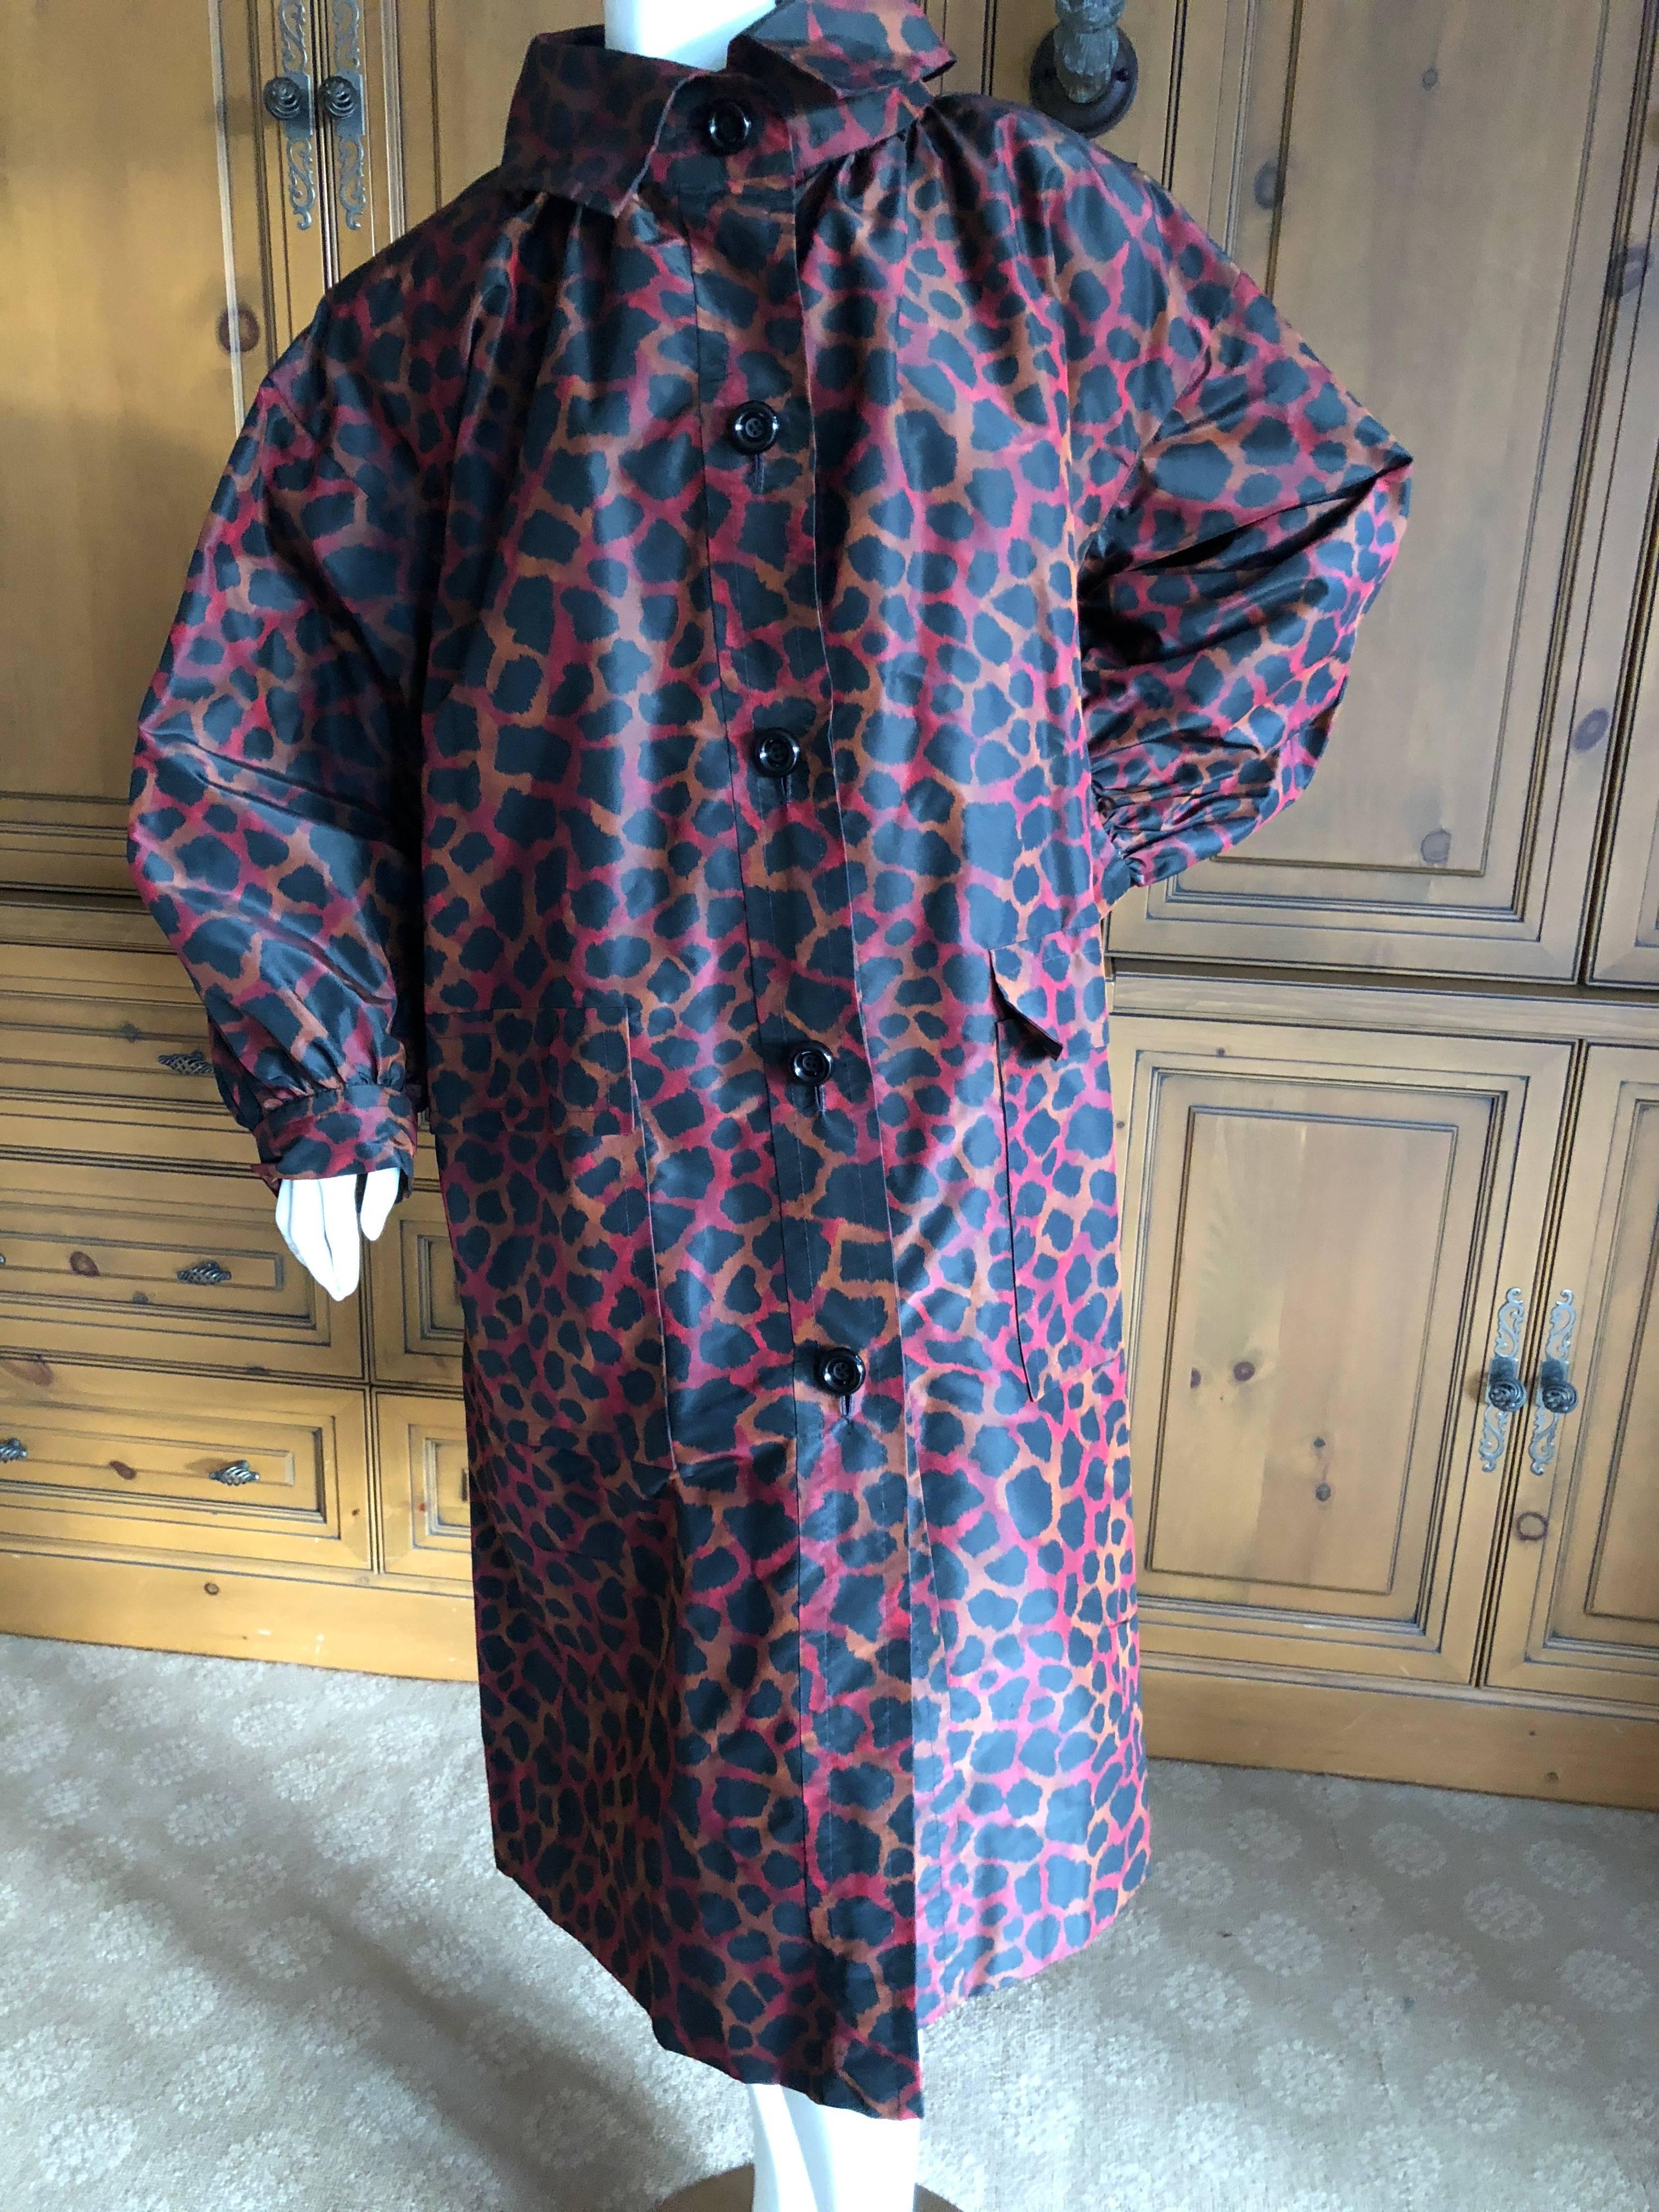 
	
	
Yves Saint Laurent Numbered Haute Couture Silk Taffeta Leopard Print Swing Coat.
So beautiful, the colors are true on the close up photos , shades of red and orange.
Huge swing, beautiful details
As it is cut in the swing style , the